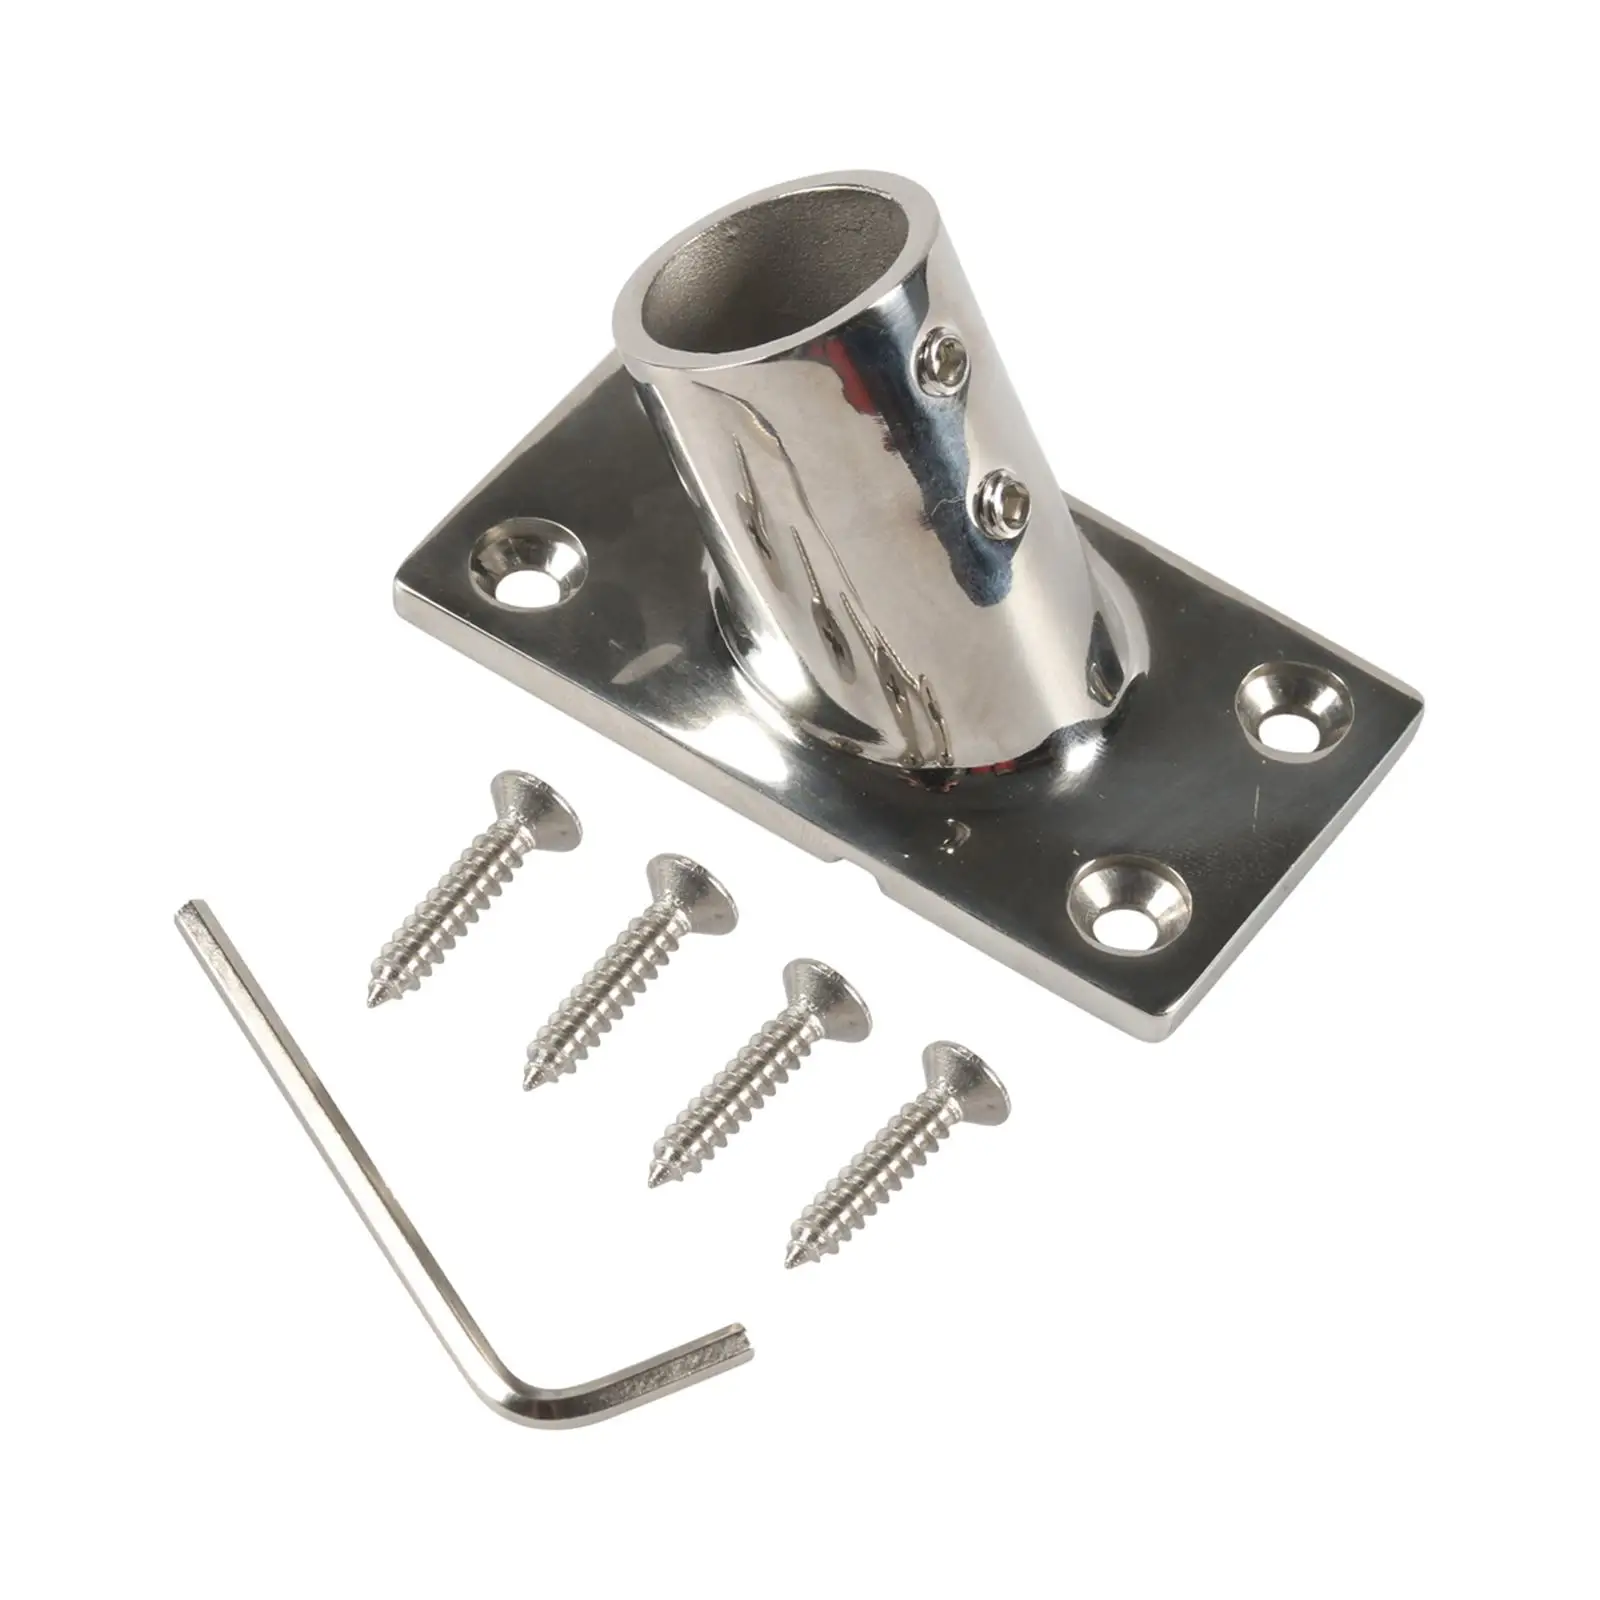 60 Degree Boat Handrail Fitting Stainless Steel Rectangular Base Hardware for Yachts Boat Inflatable Boats Marine Polished